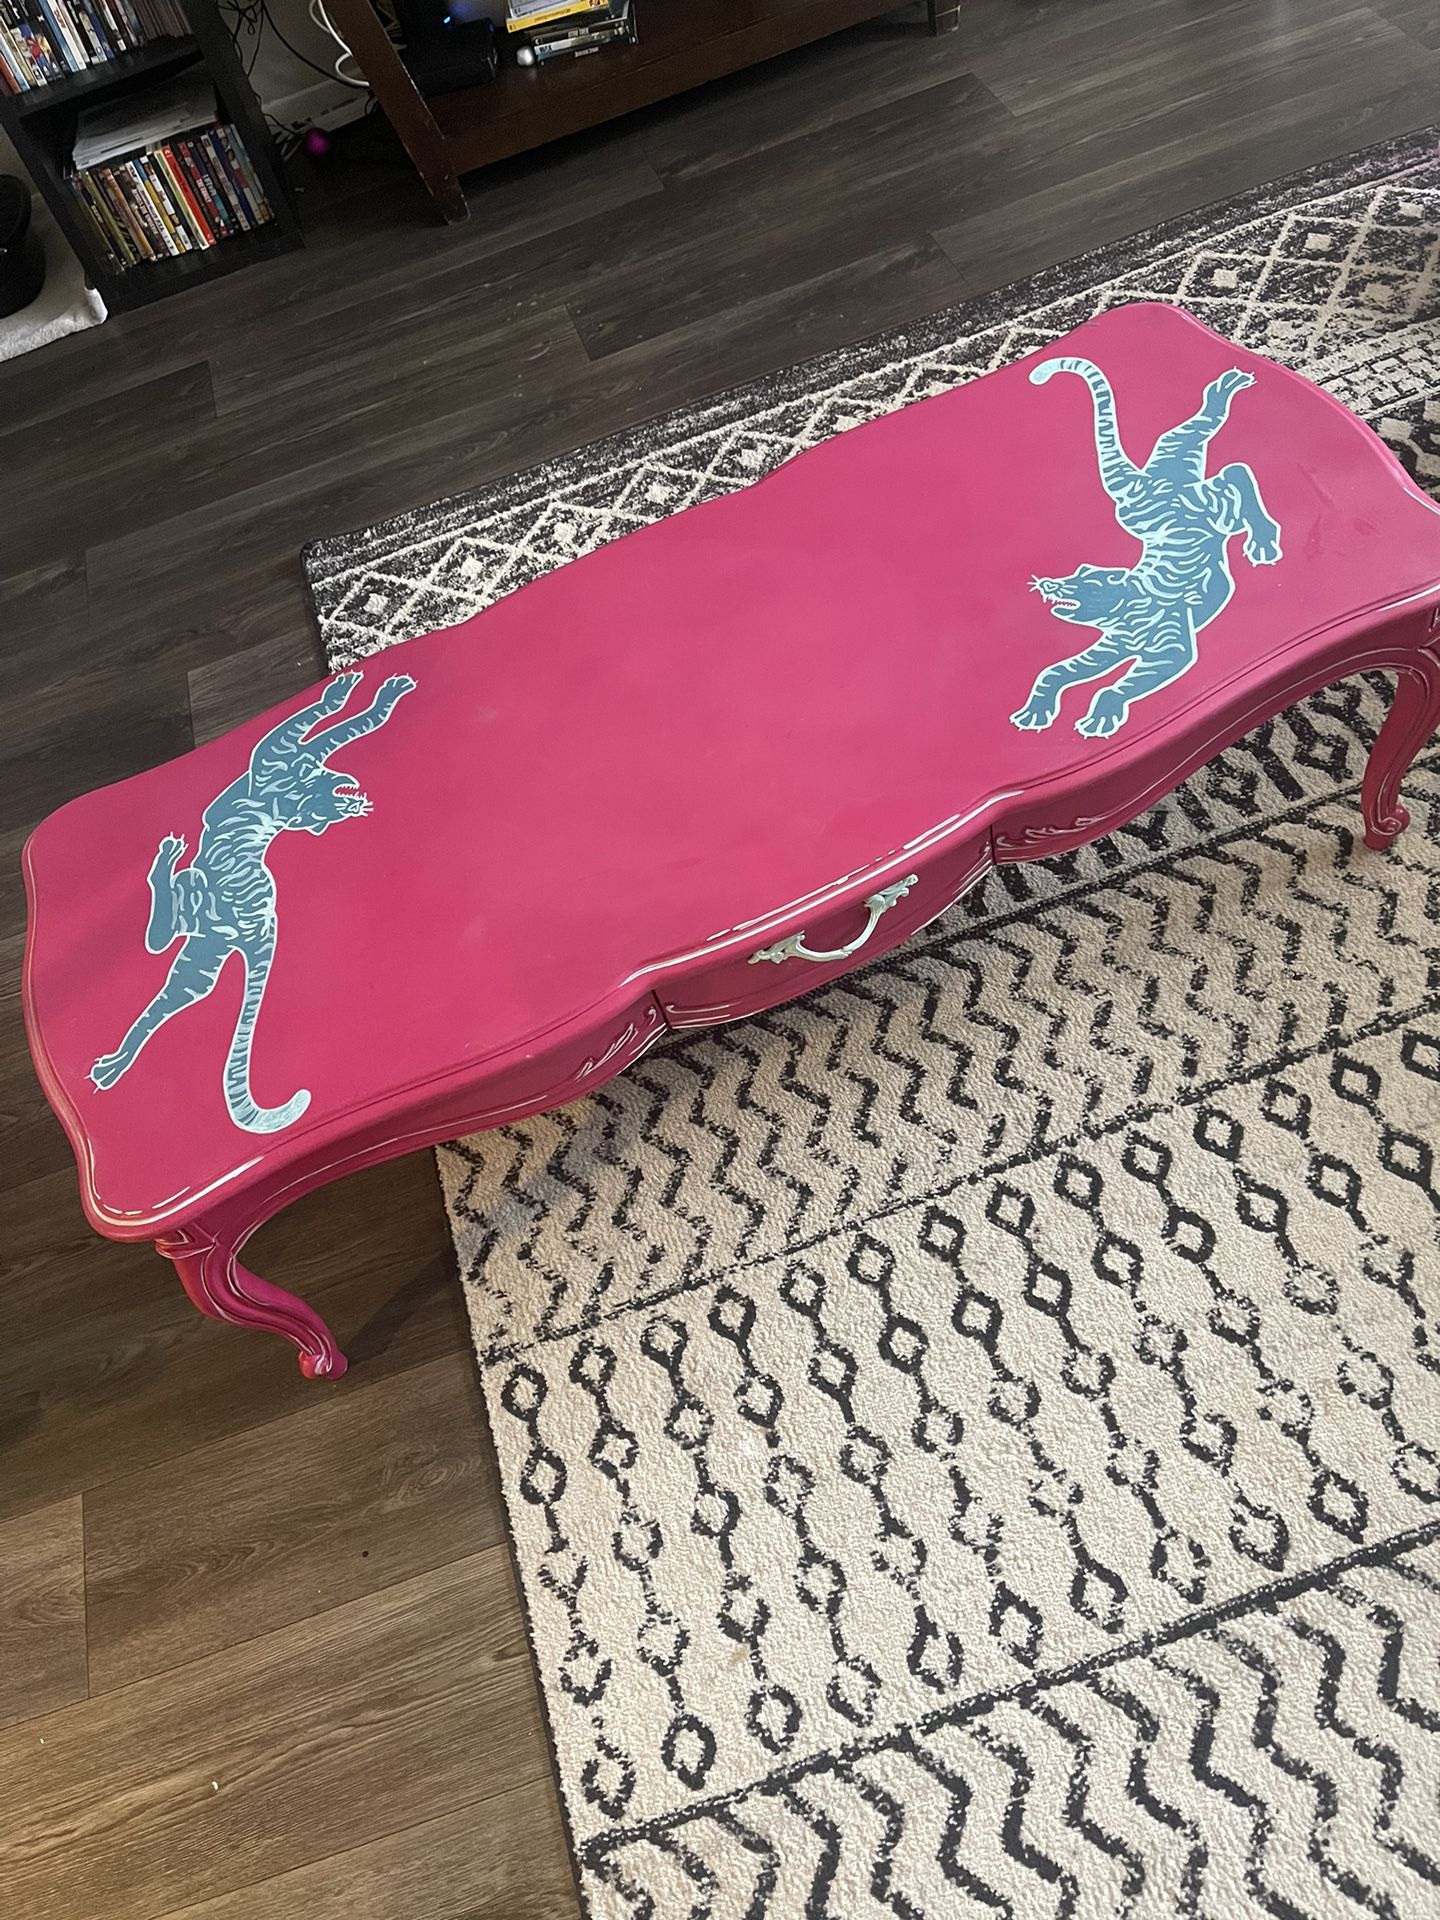 Hot Pink Antique Coffee Table With Hand Painted Tigers